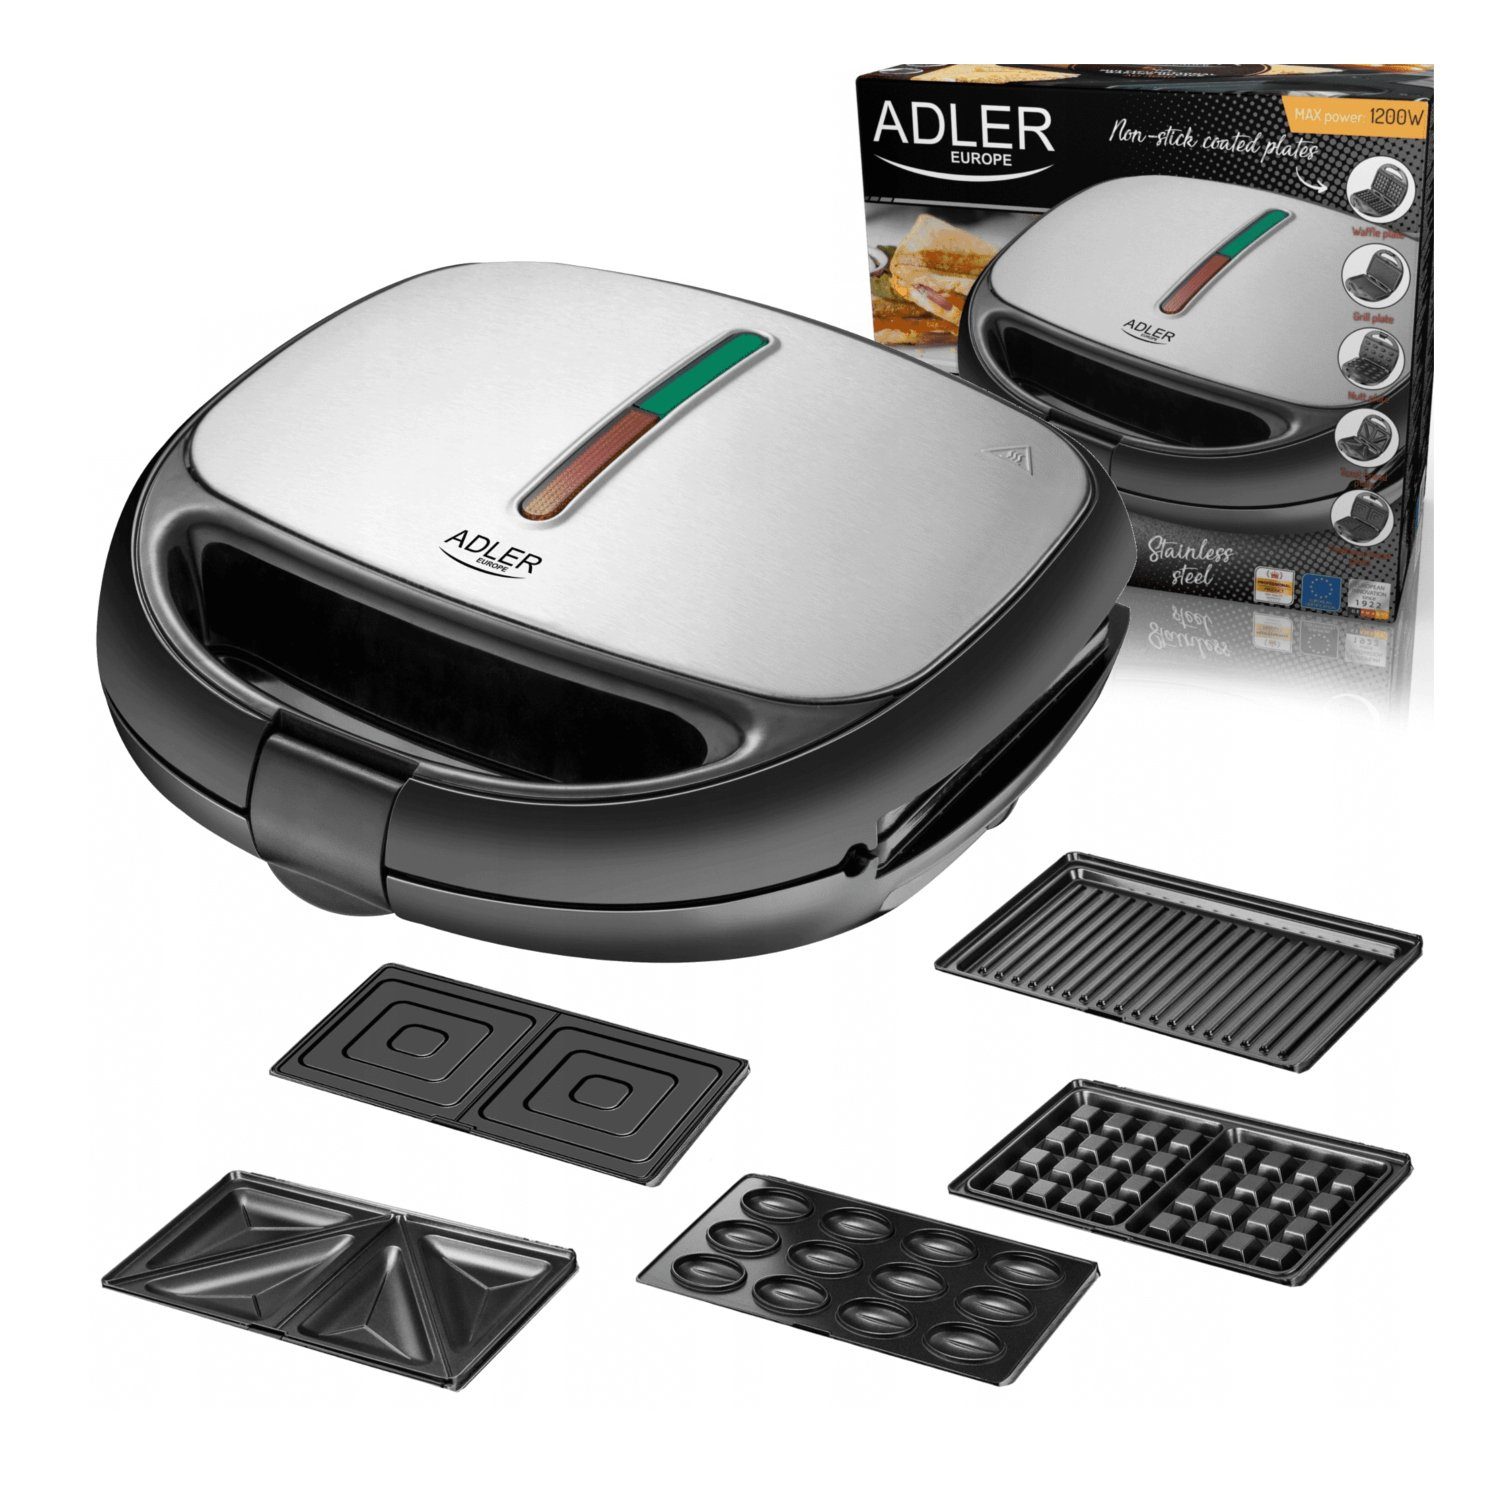 Adler Toaster AD 3040, 1200 W, 5in1 mit Multifunktions-Toaster Funktionen